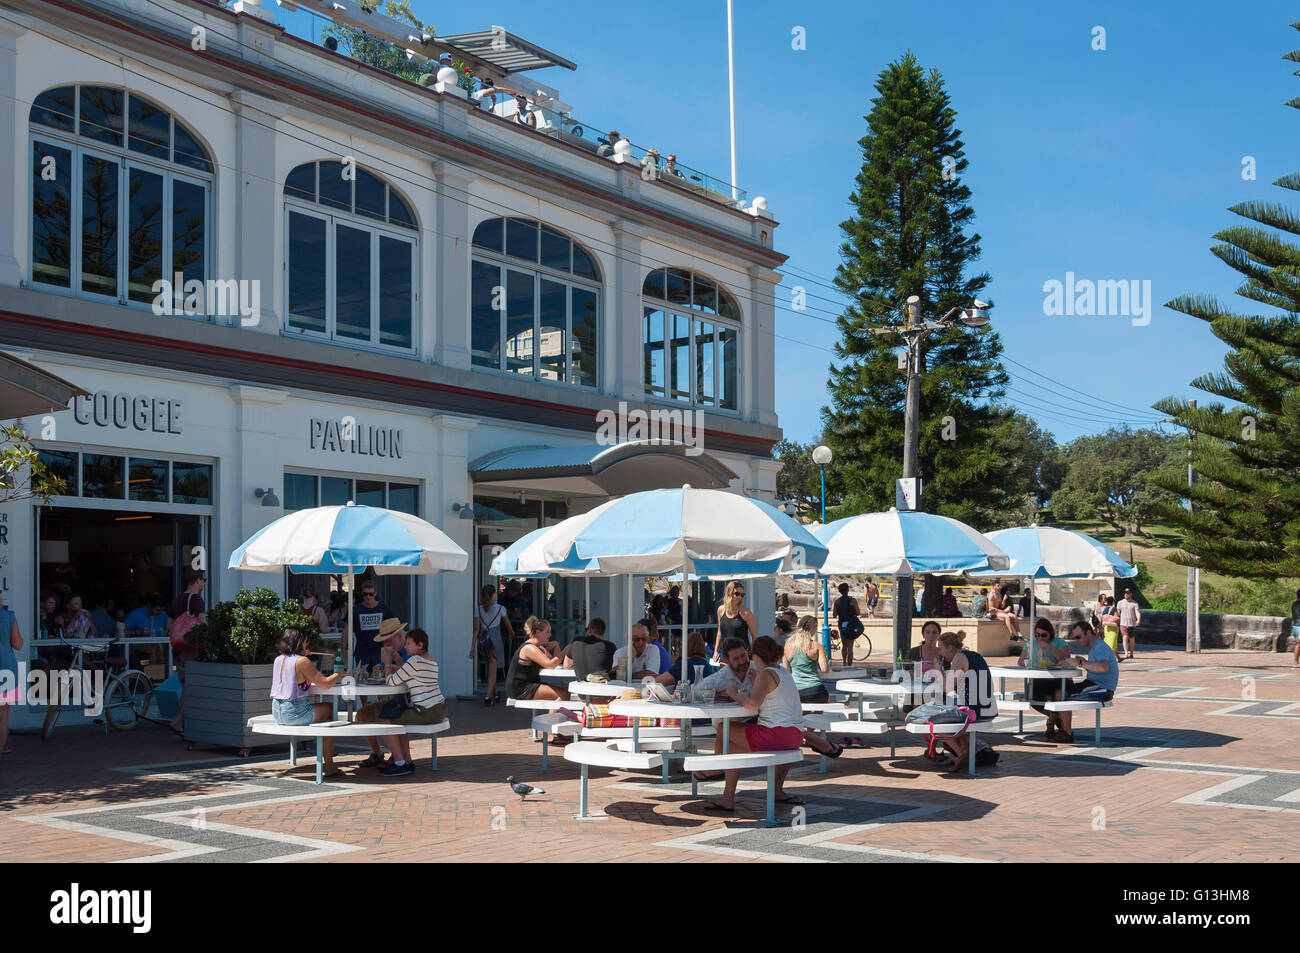 Coogee ristorante Pavilion, Coogee Beach, Coogee, Sydney, Nuovo Galles del Sud, Australia Foto Stock